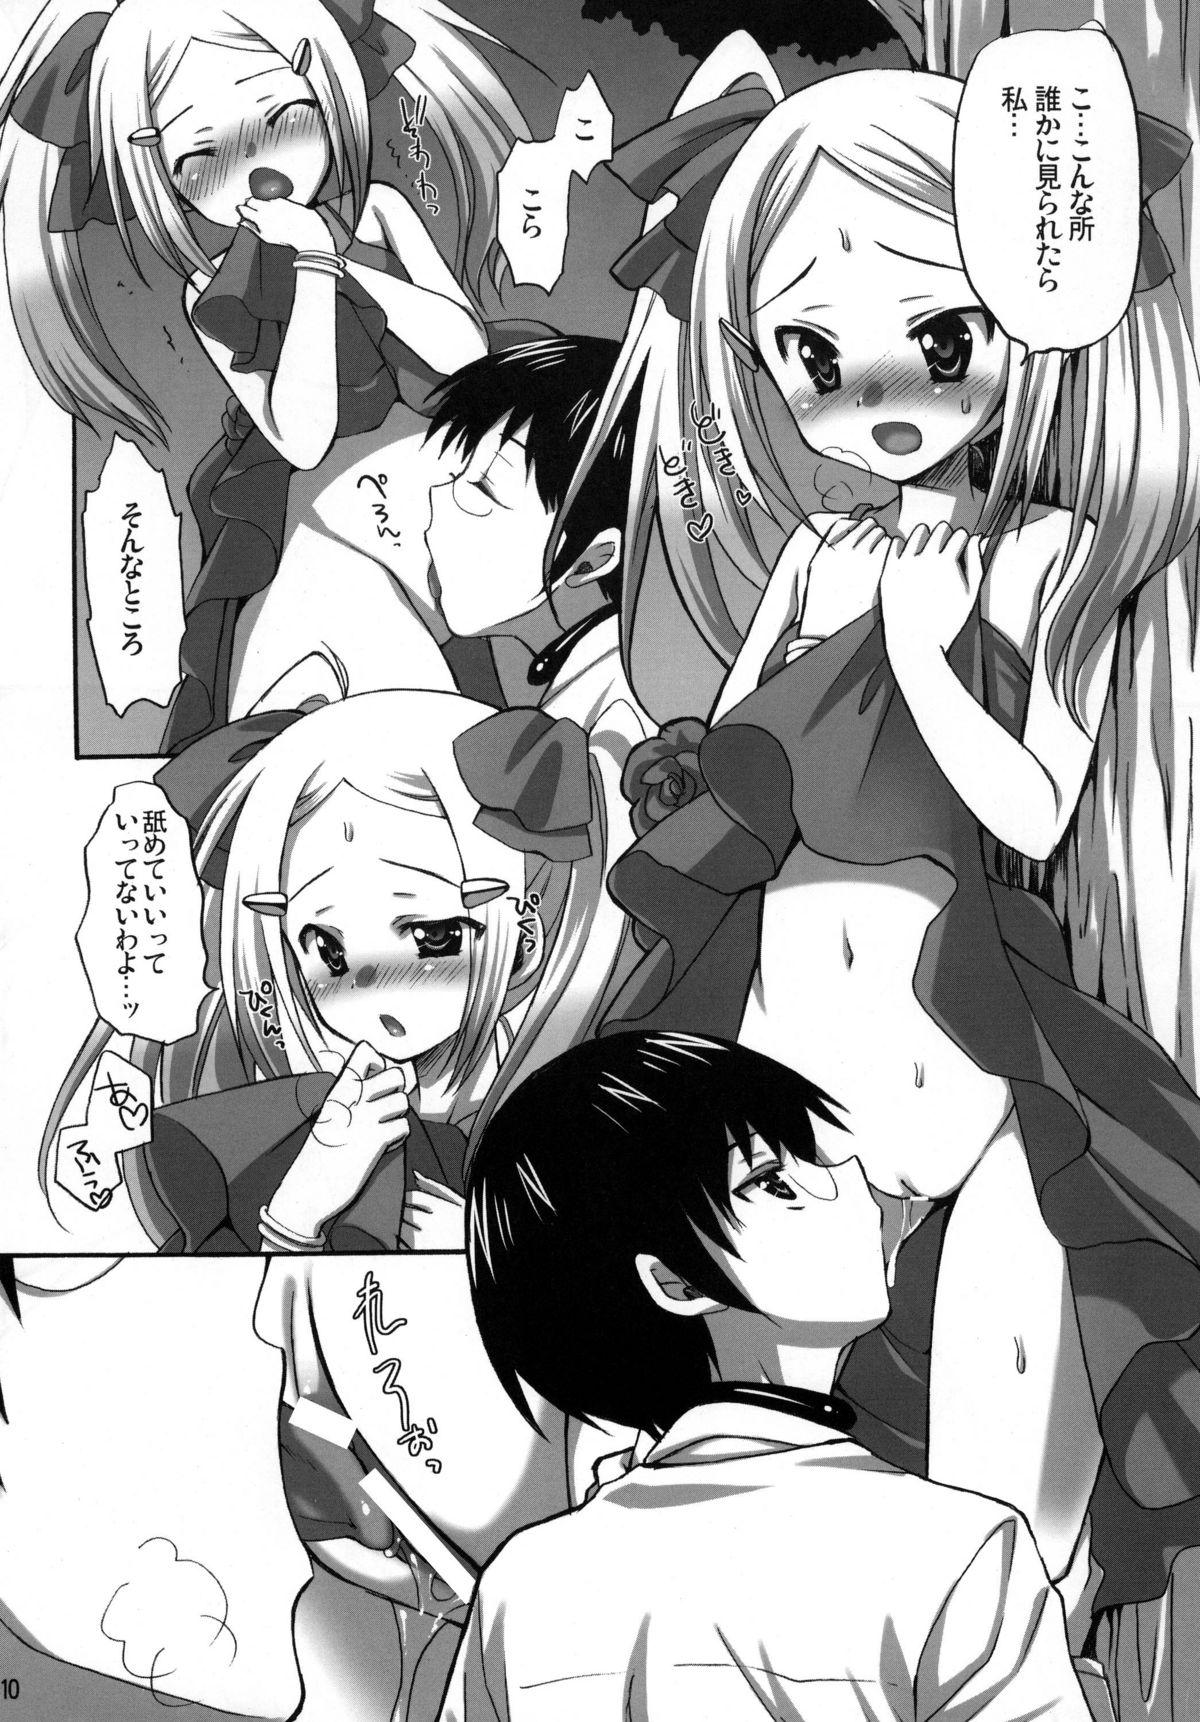 Officesex Kami Nomi zo Fullcomp - The world god only knows Sperm - Page 10